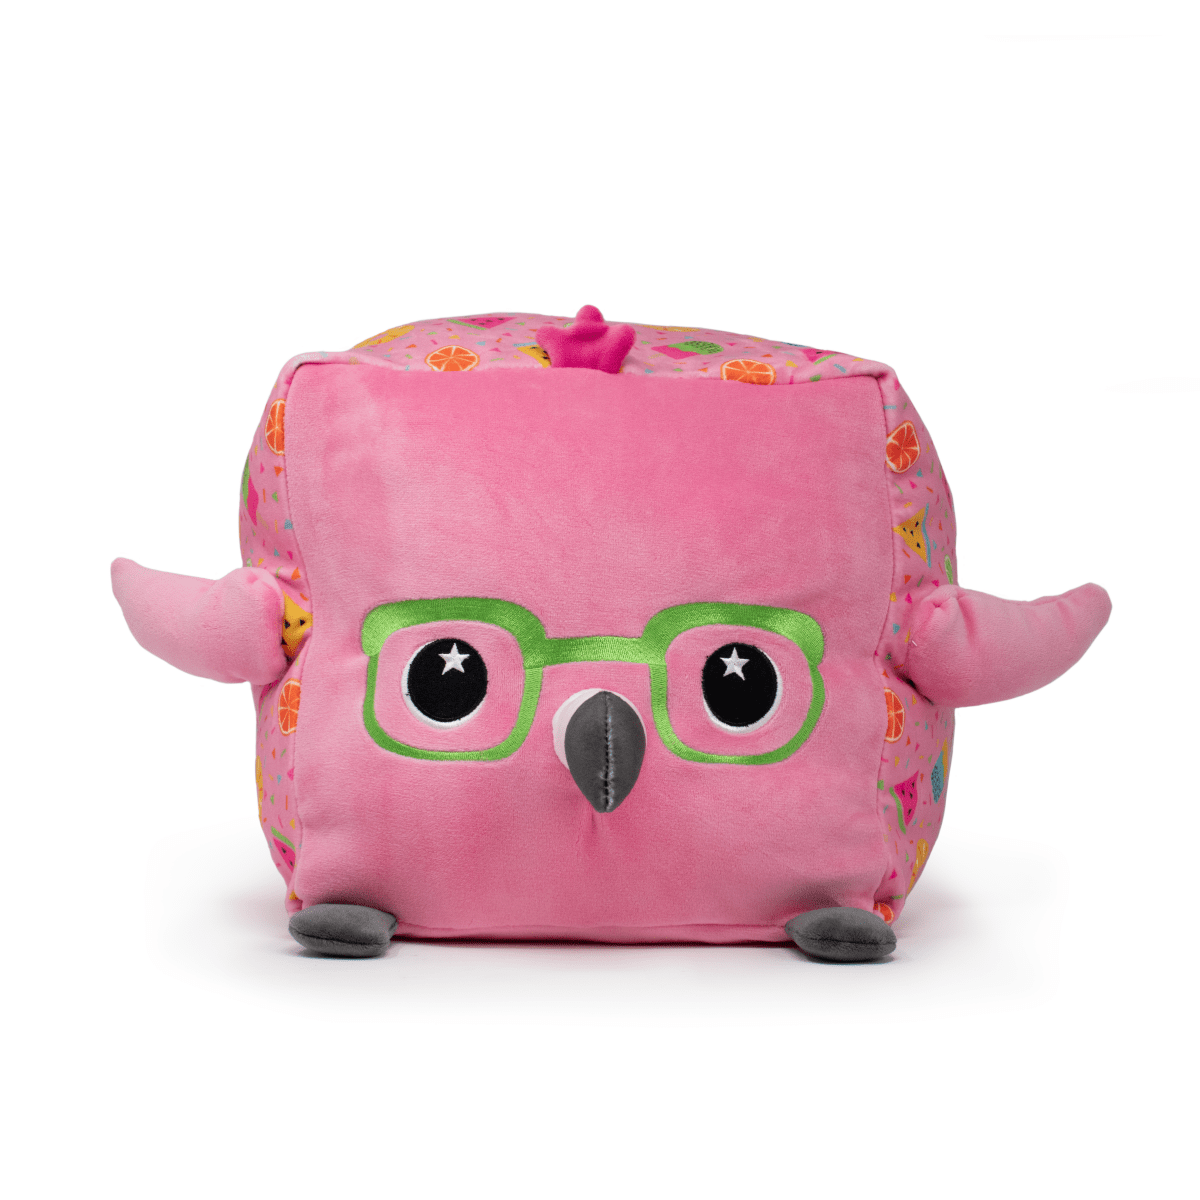 Pippin the Flamingo plush toy with bright pink feathers and green glasses from Moosh-Moosh SQUARED² Collection.